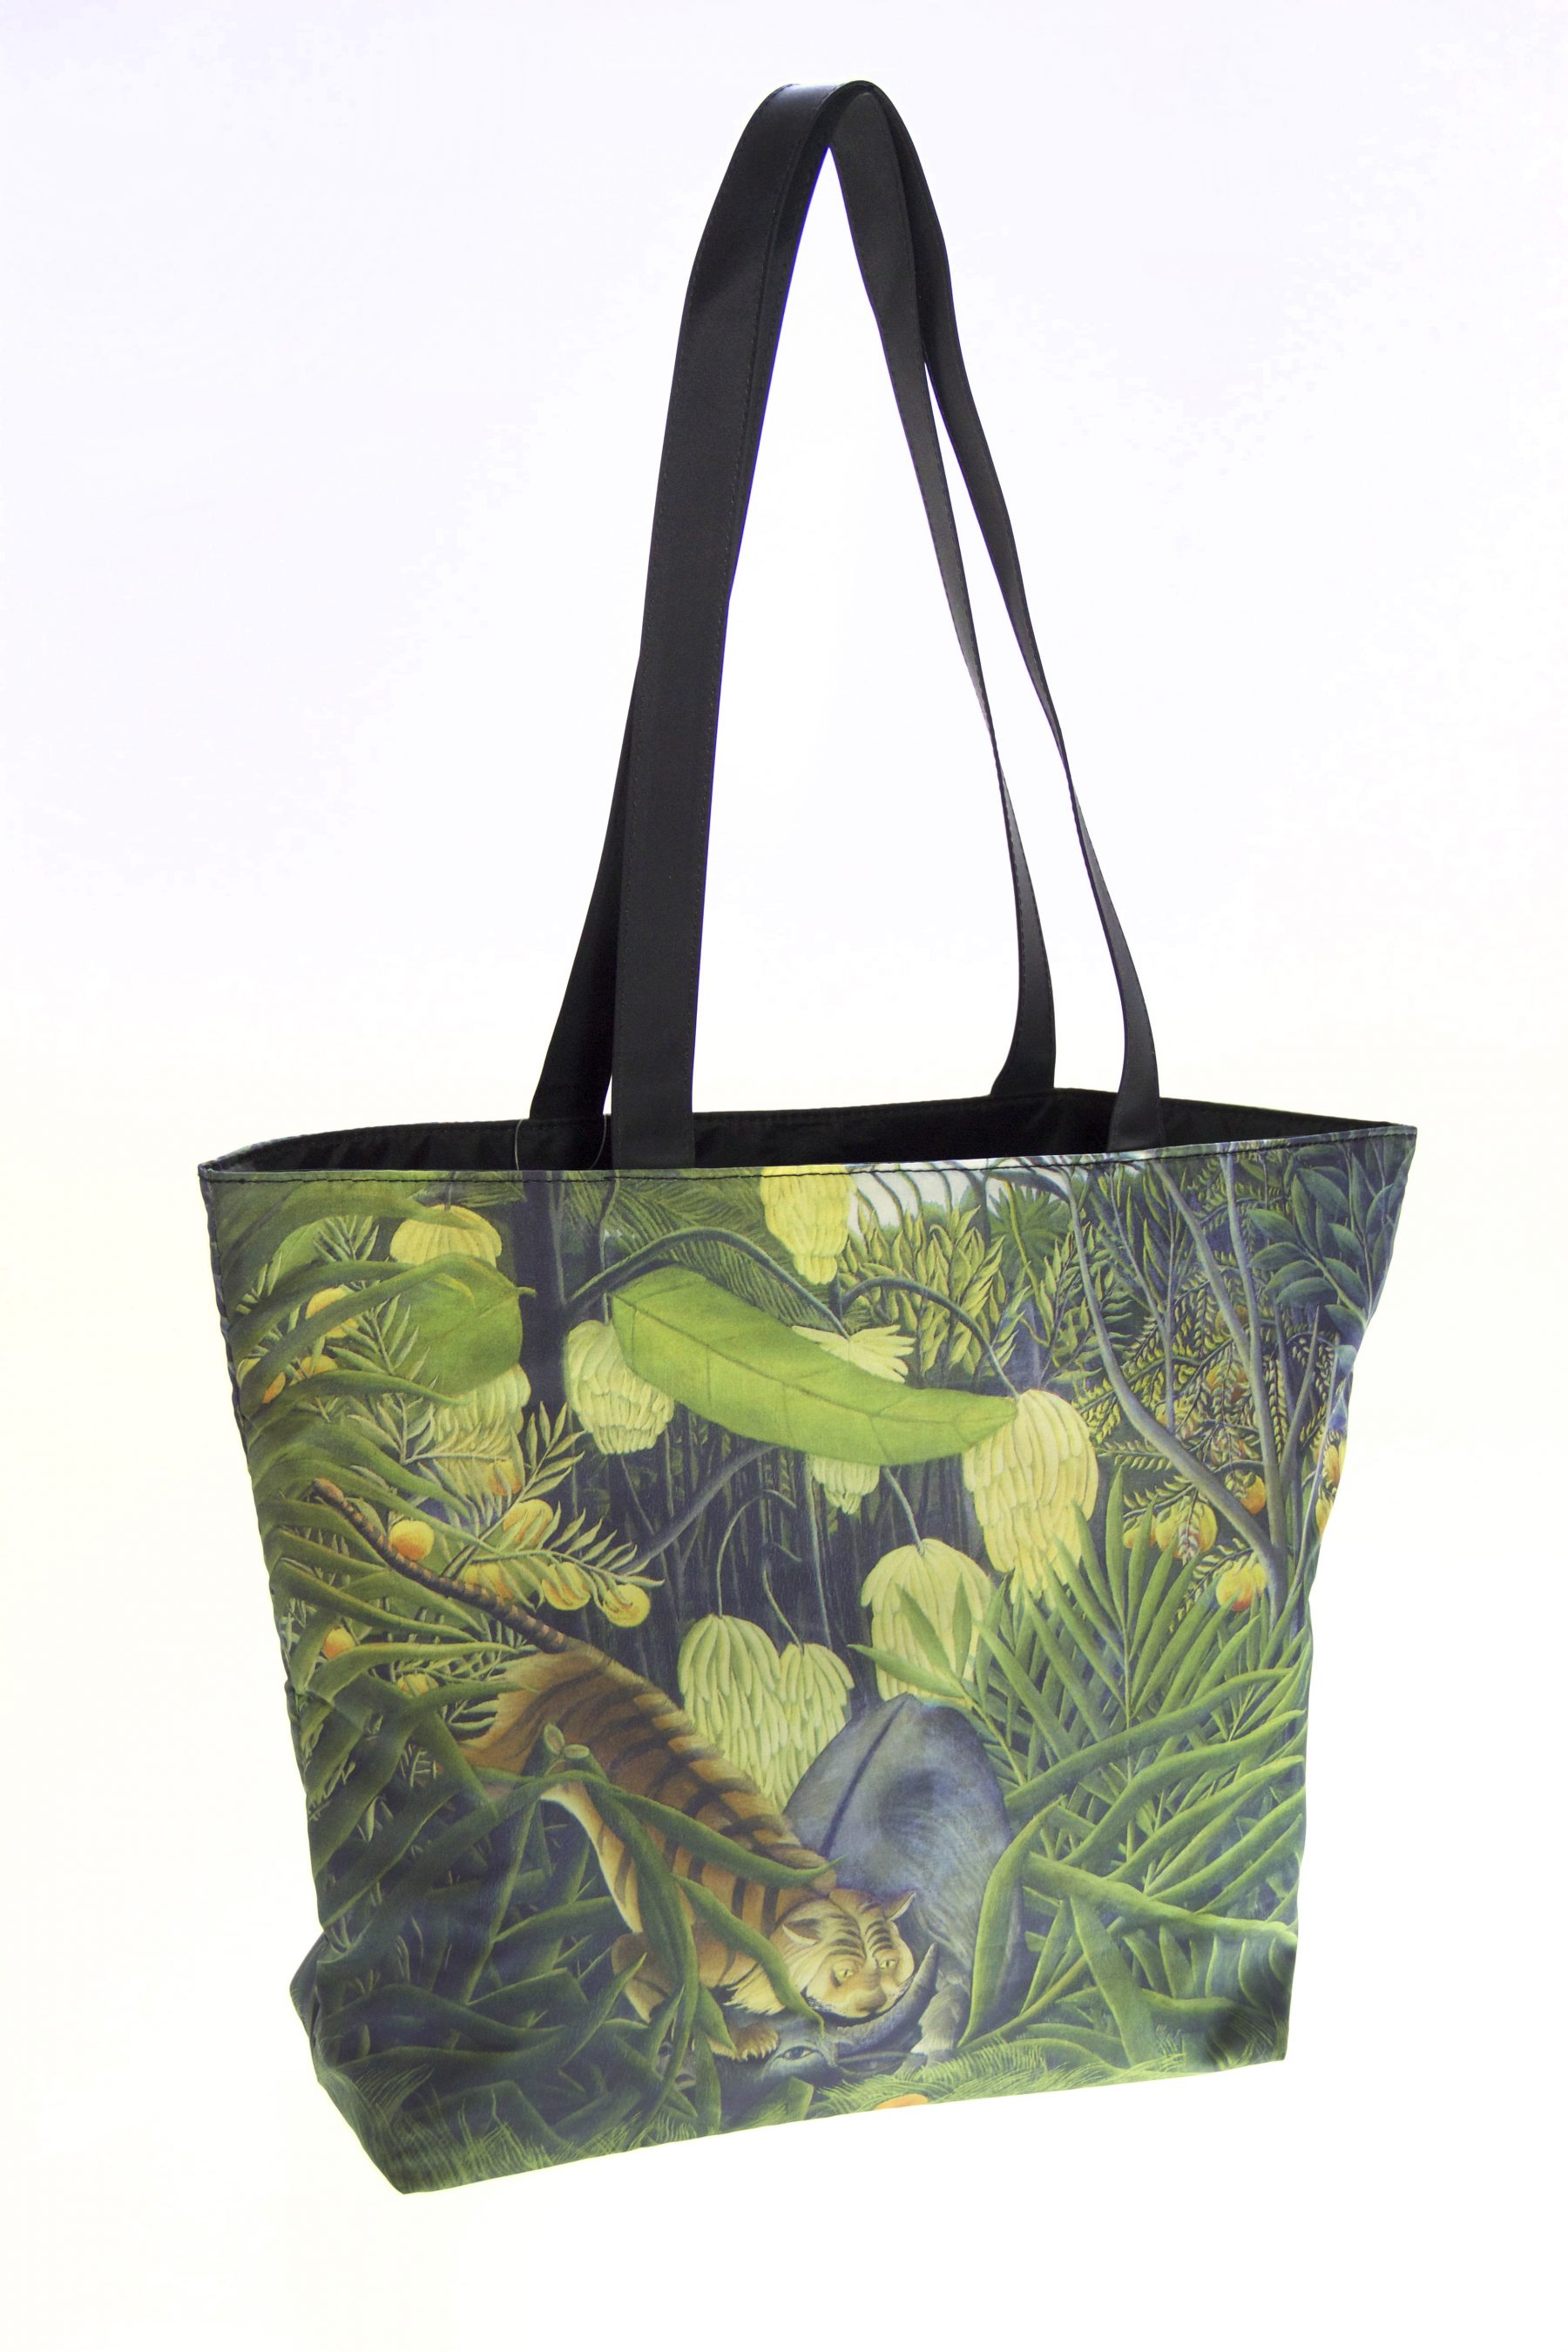 Totes with Full Color Artwork made to order - Gouda, Inc.